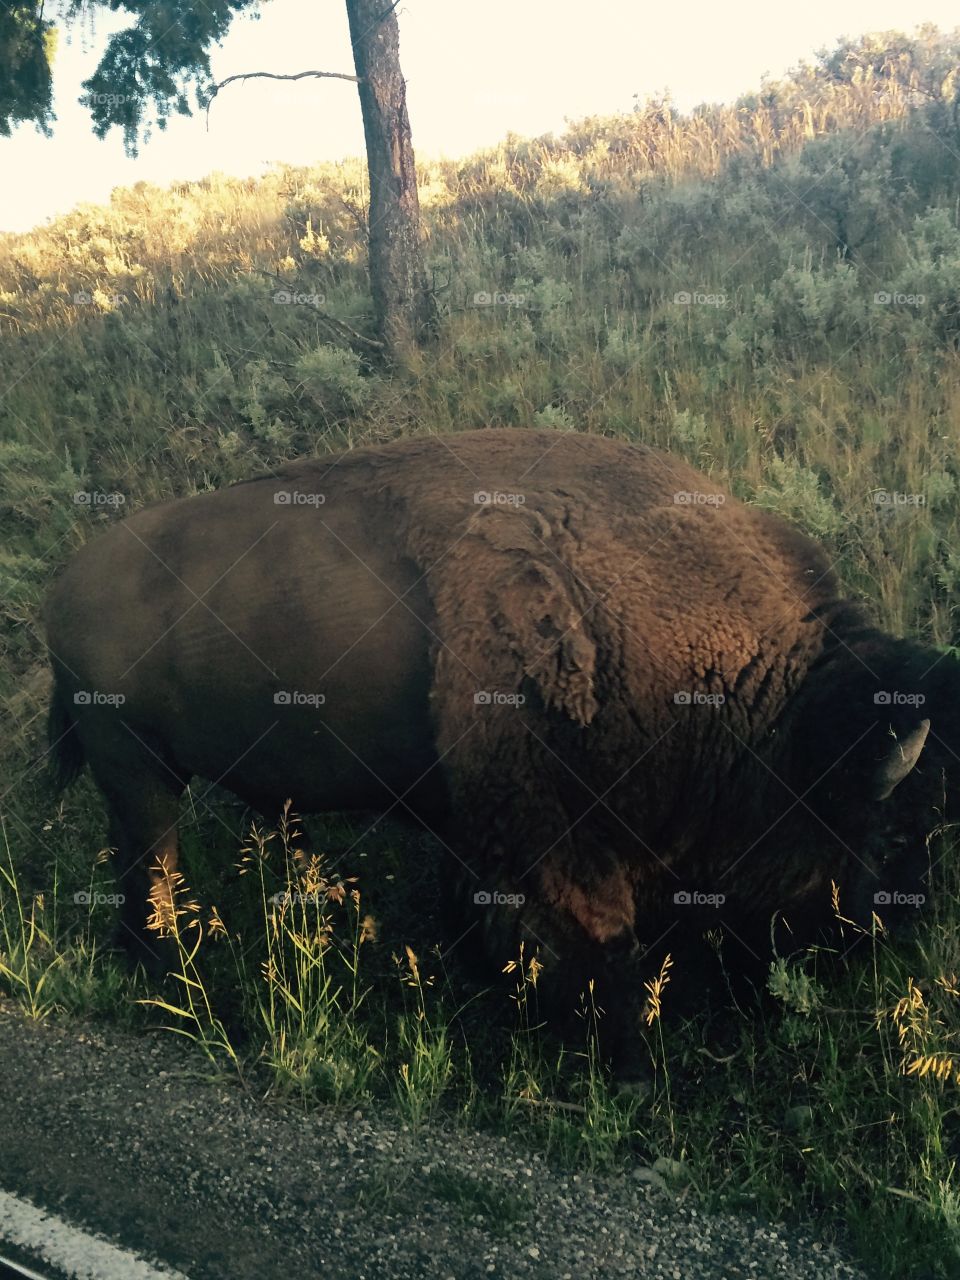 A buffalo on the side of the road. 